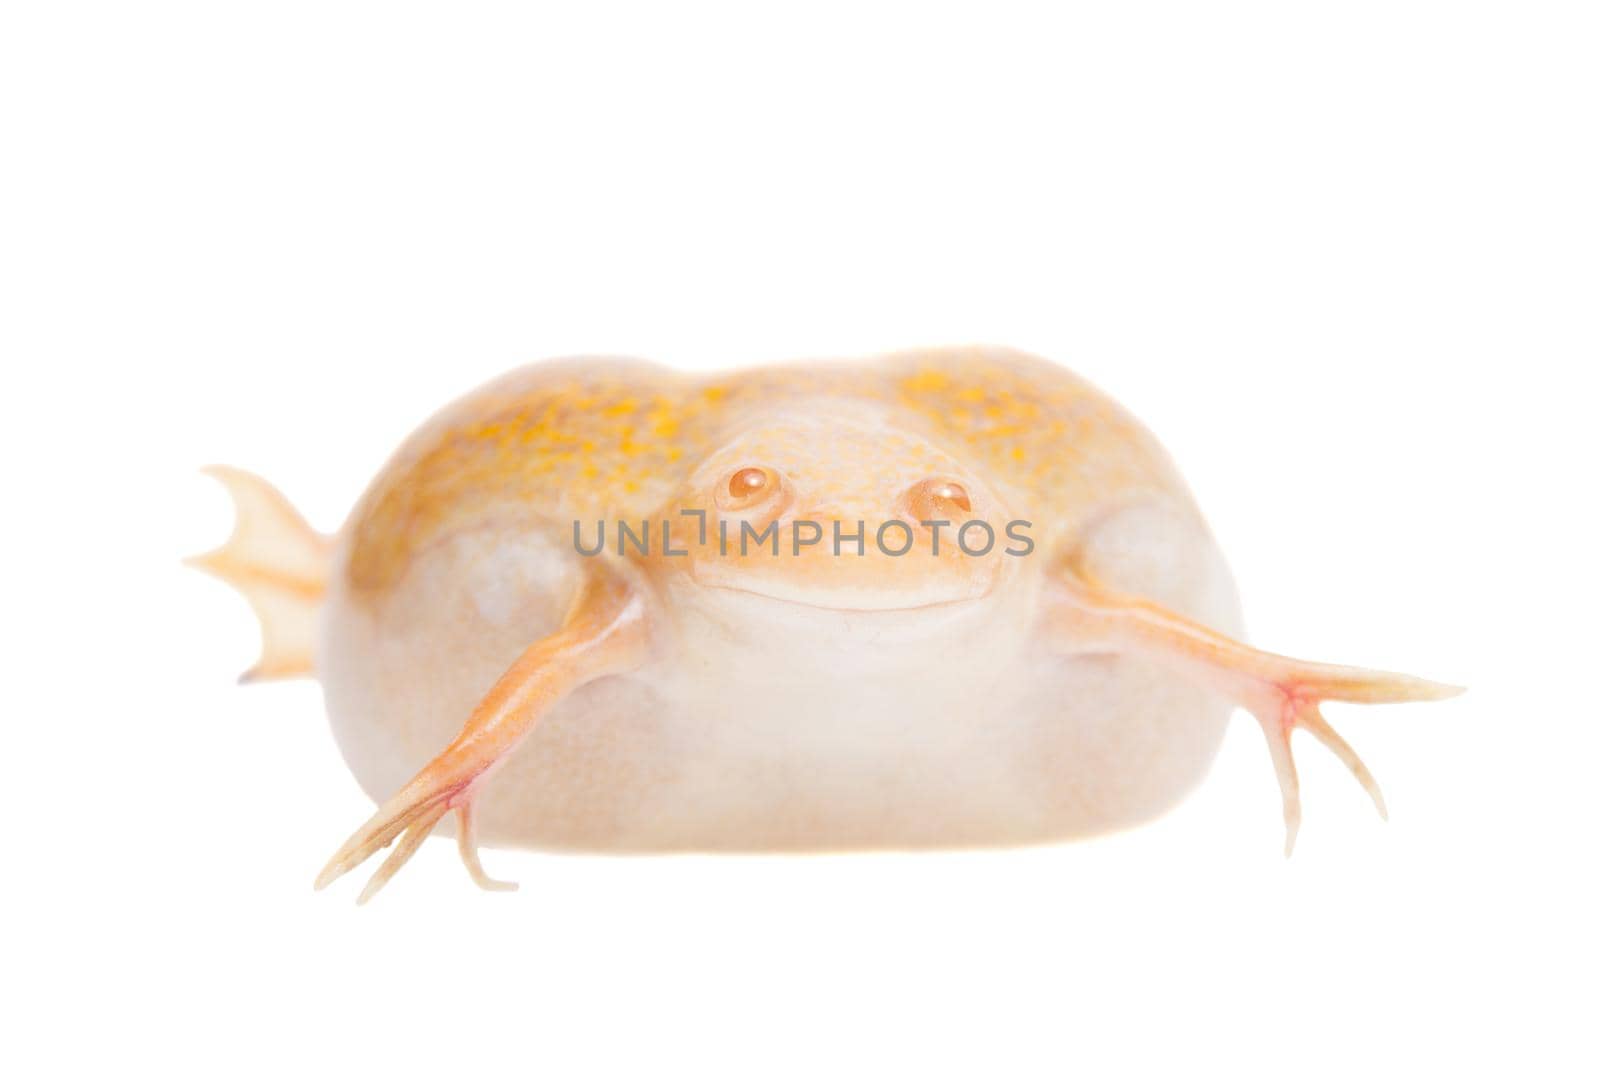 Albino african clawed frog or Xenopus laevis frog isolated on white background